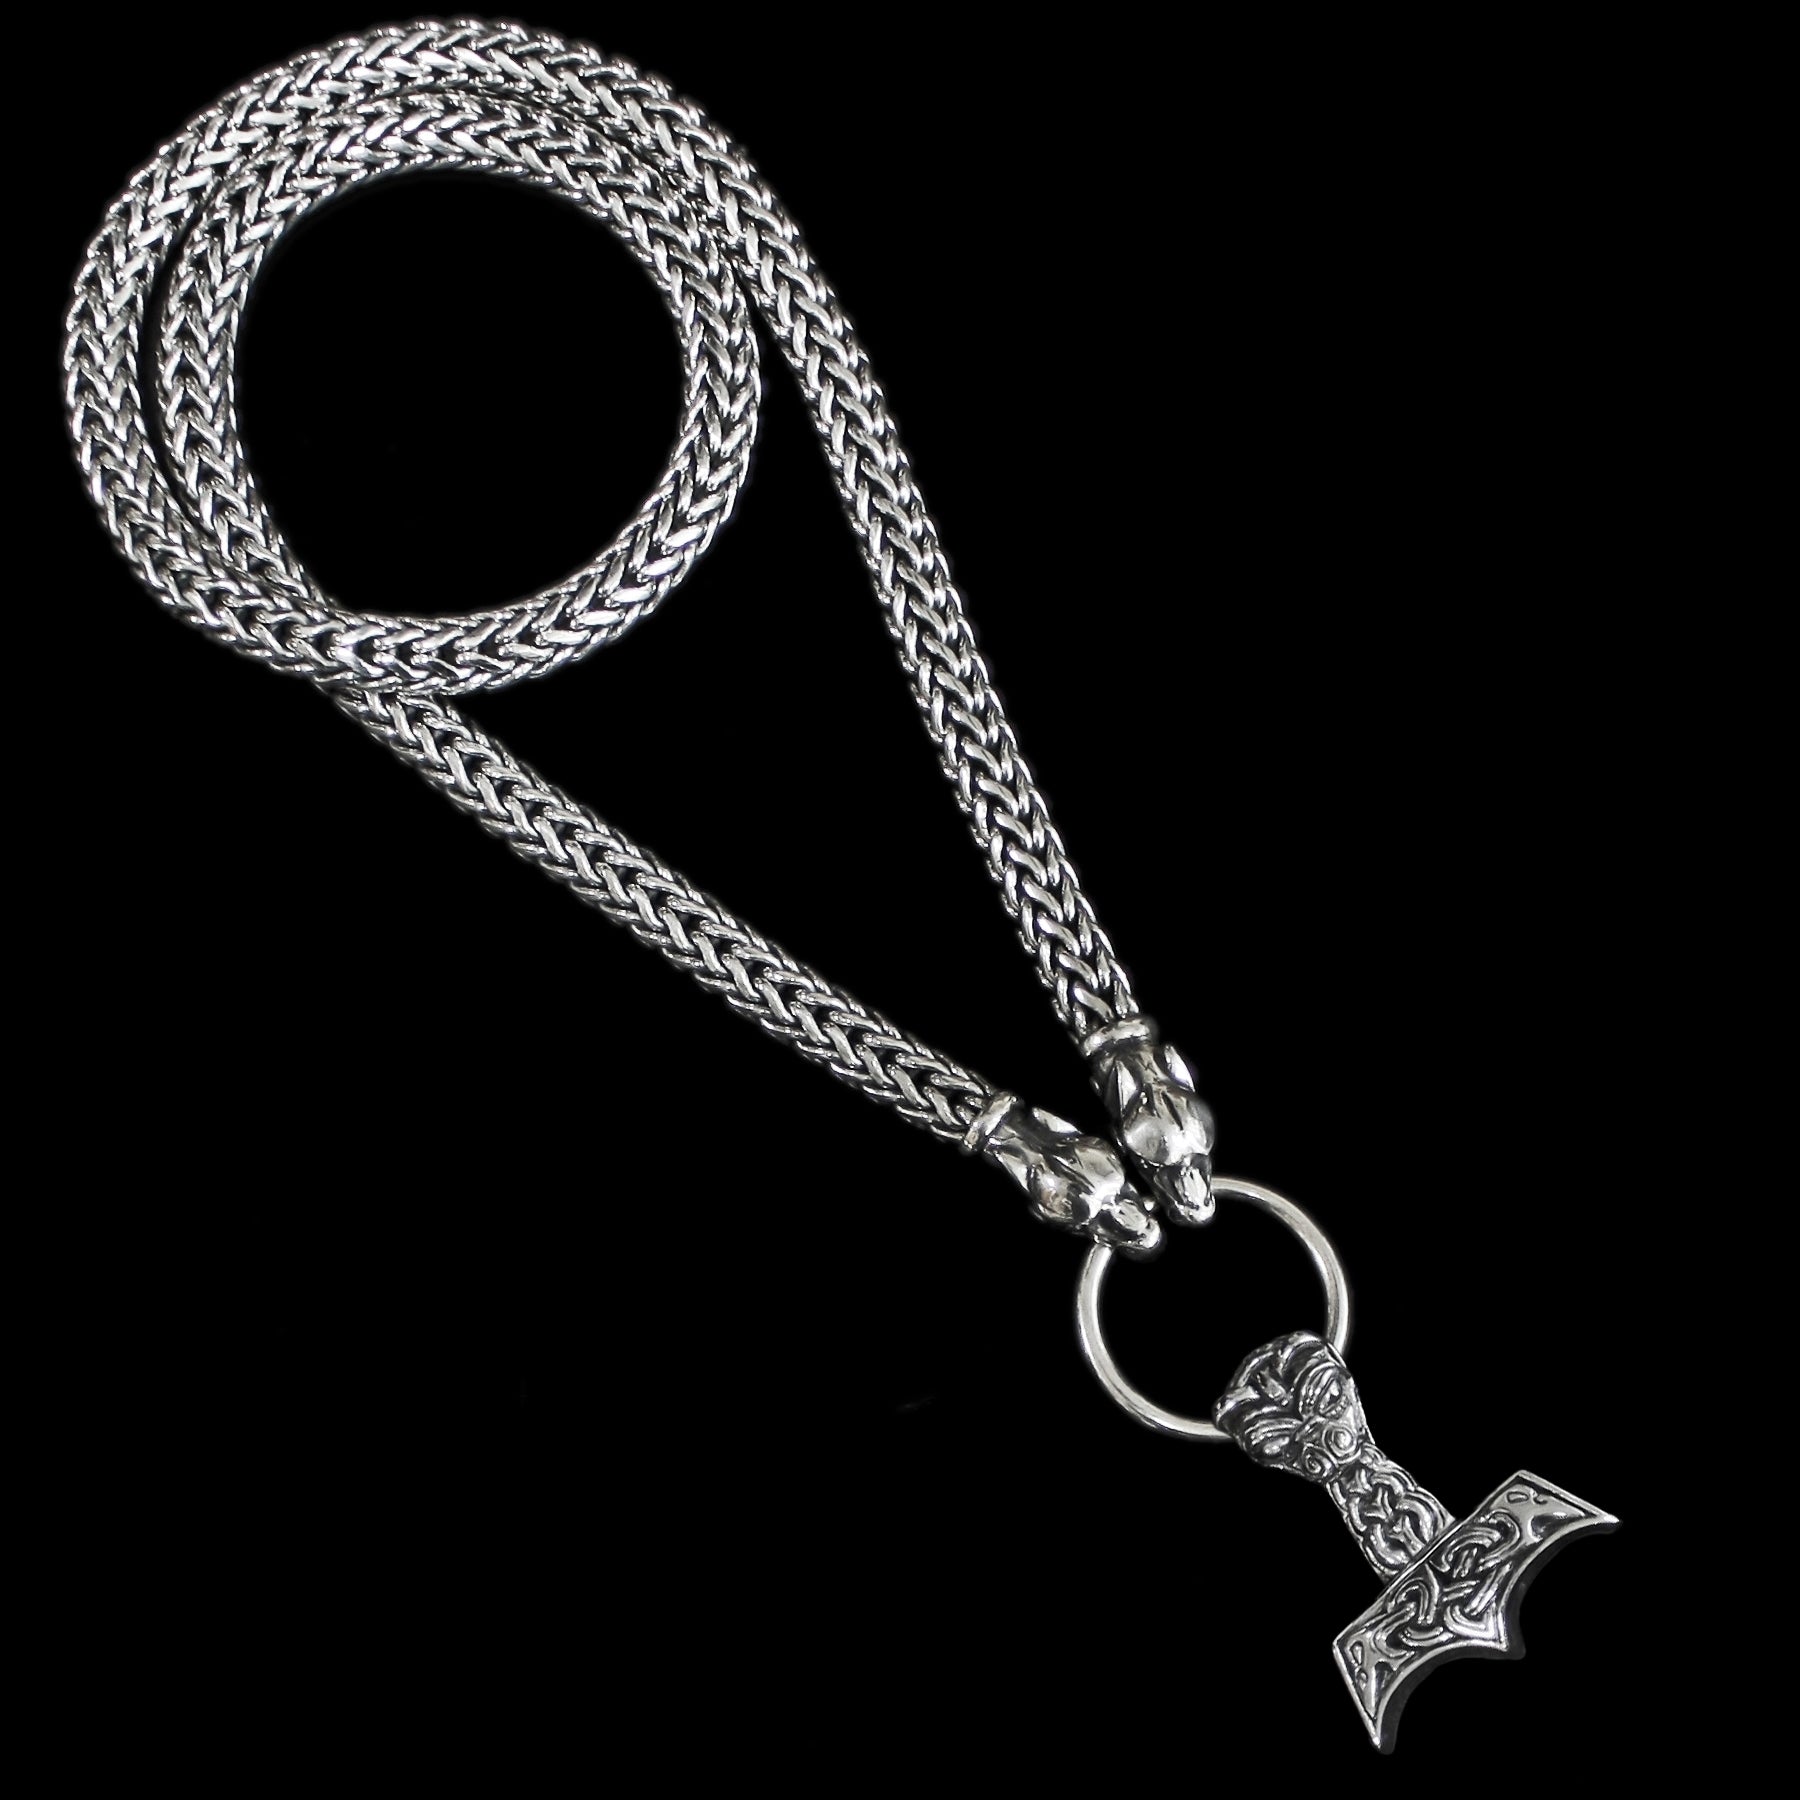 8mm Thick Silver Snake Chain Thor's Hammer Necklace, Ferocious Wolf Heads with Large Ferocious Thor's Hammer Pendant - Viking Jewelry